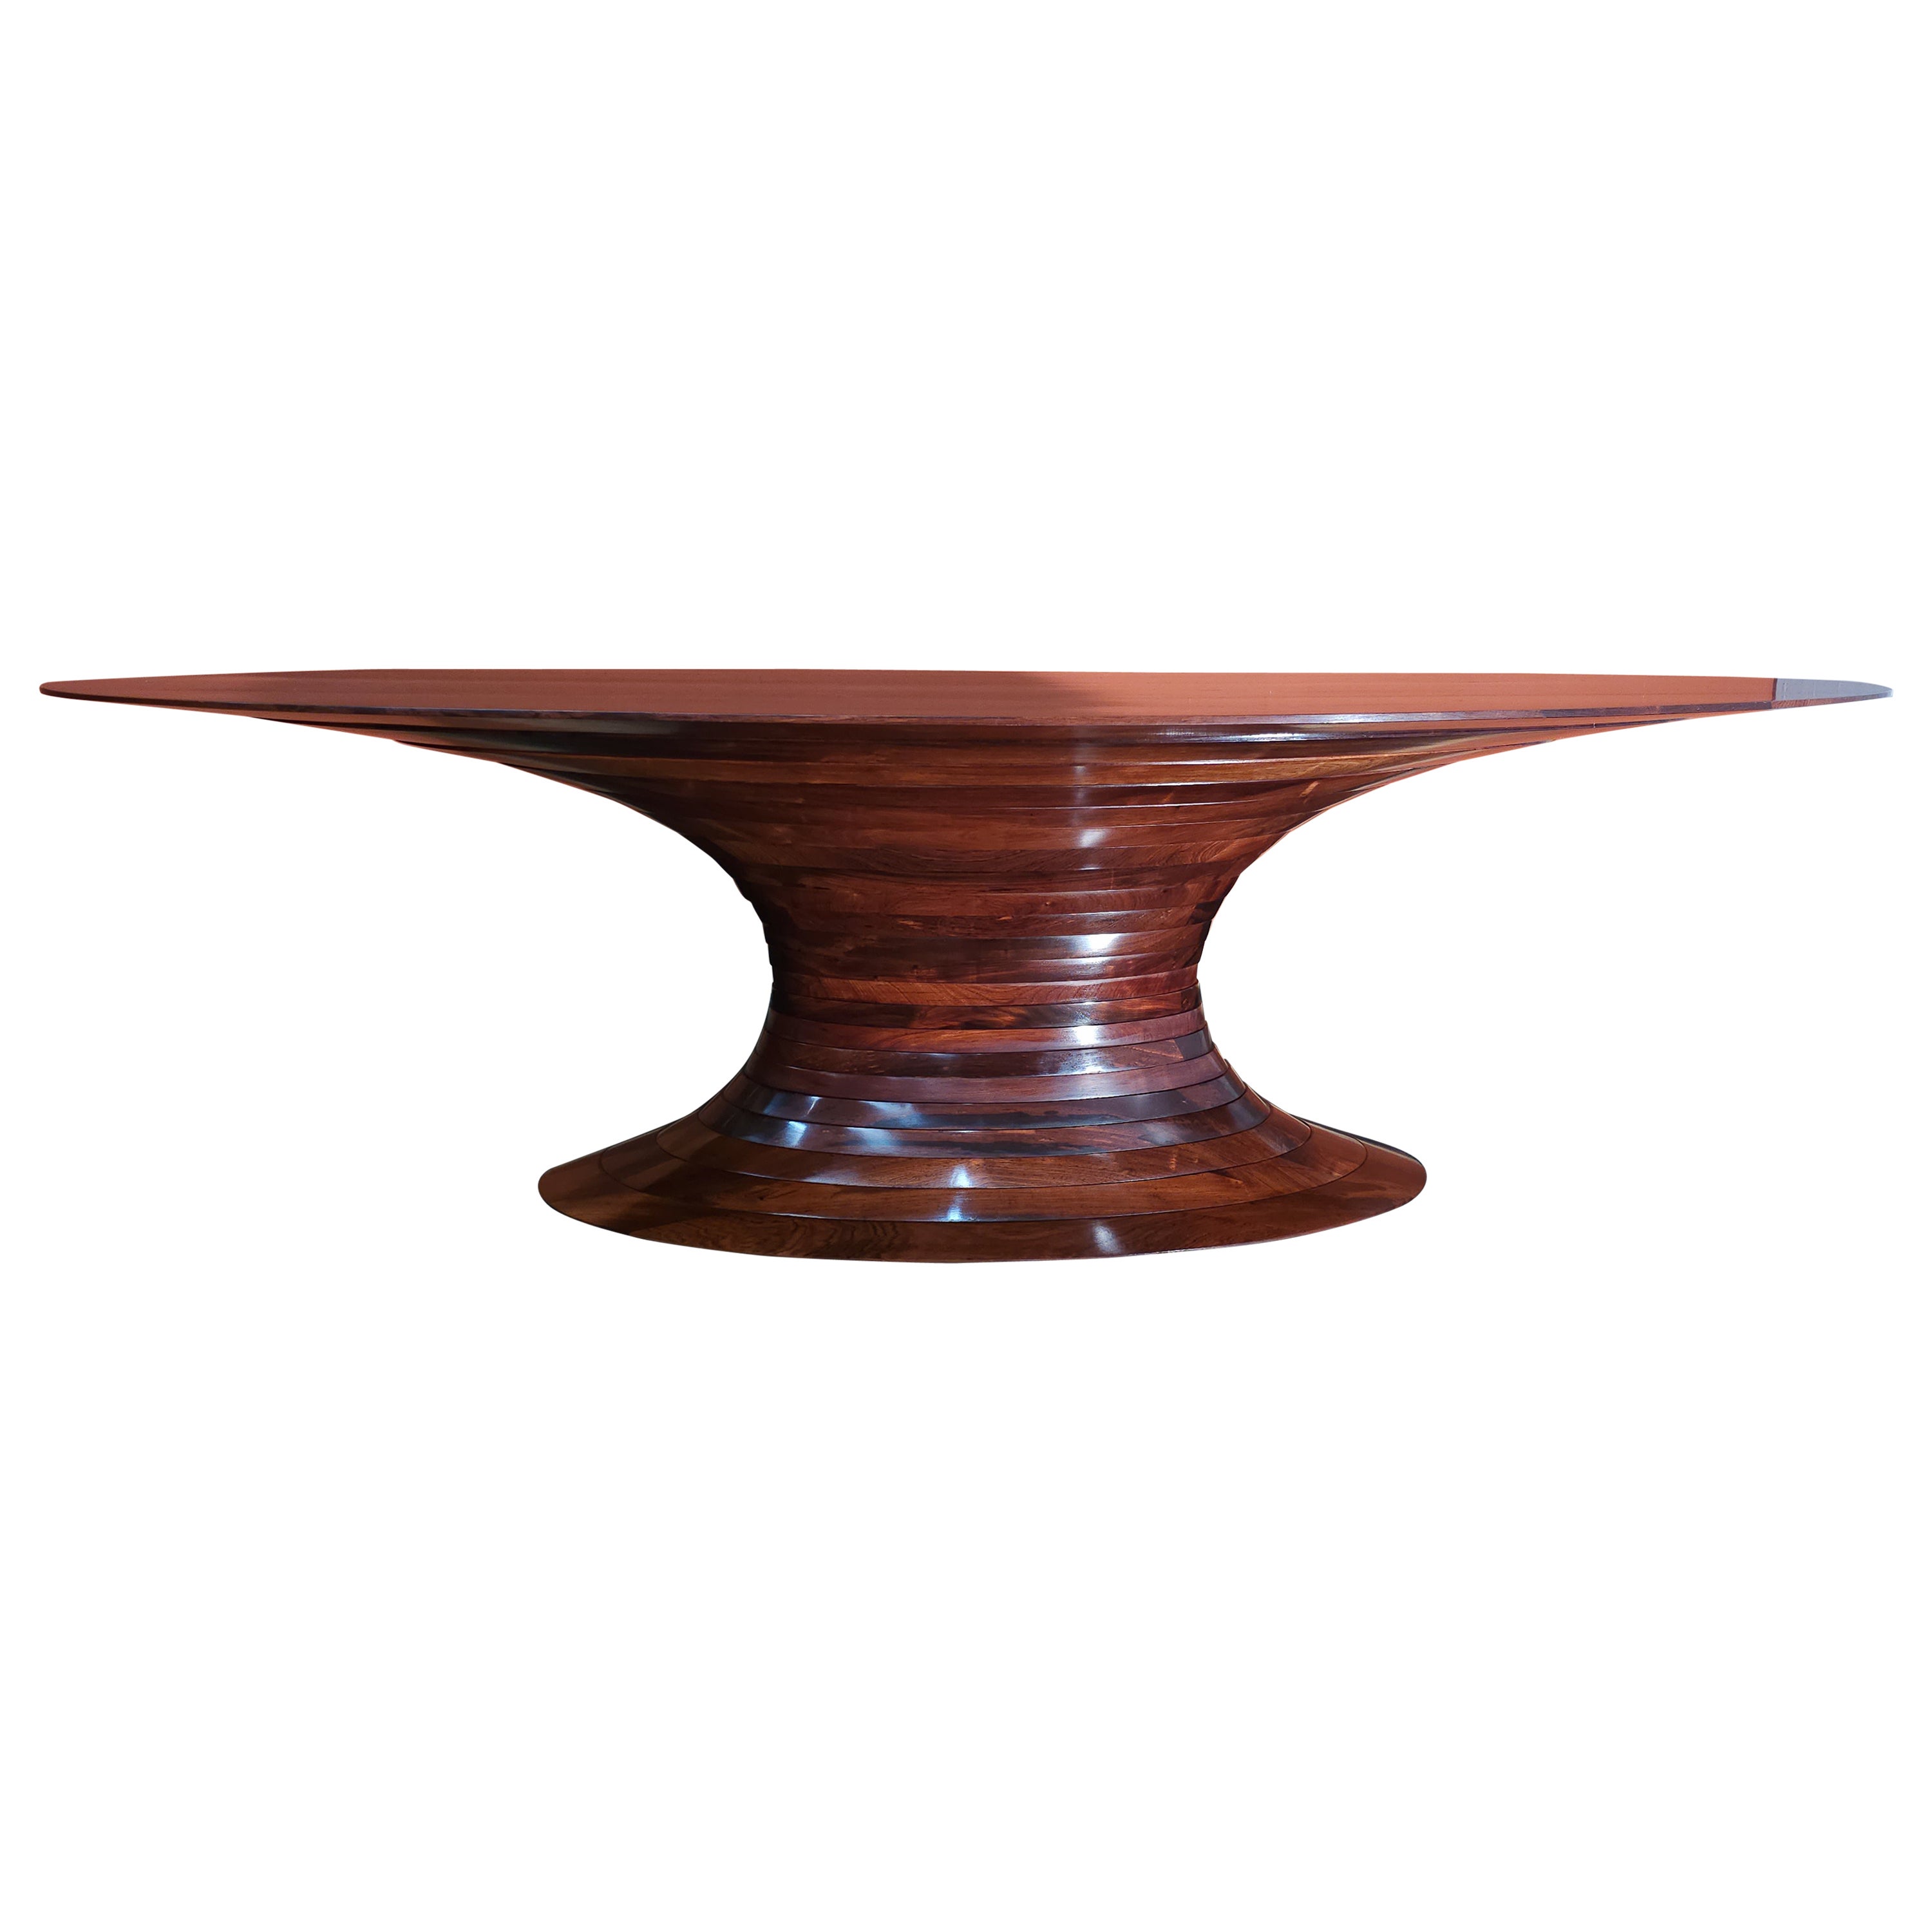  Limited edition Italian solid rosewood oval dining table For Sale